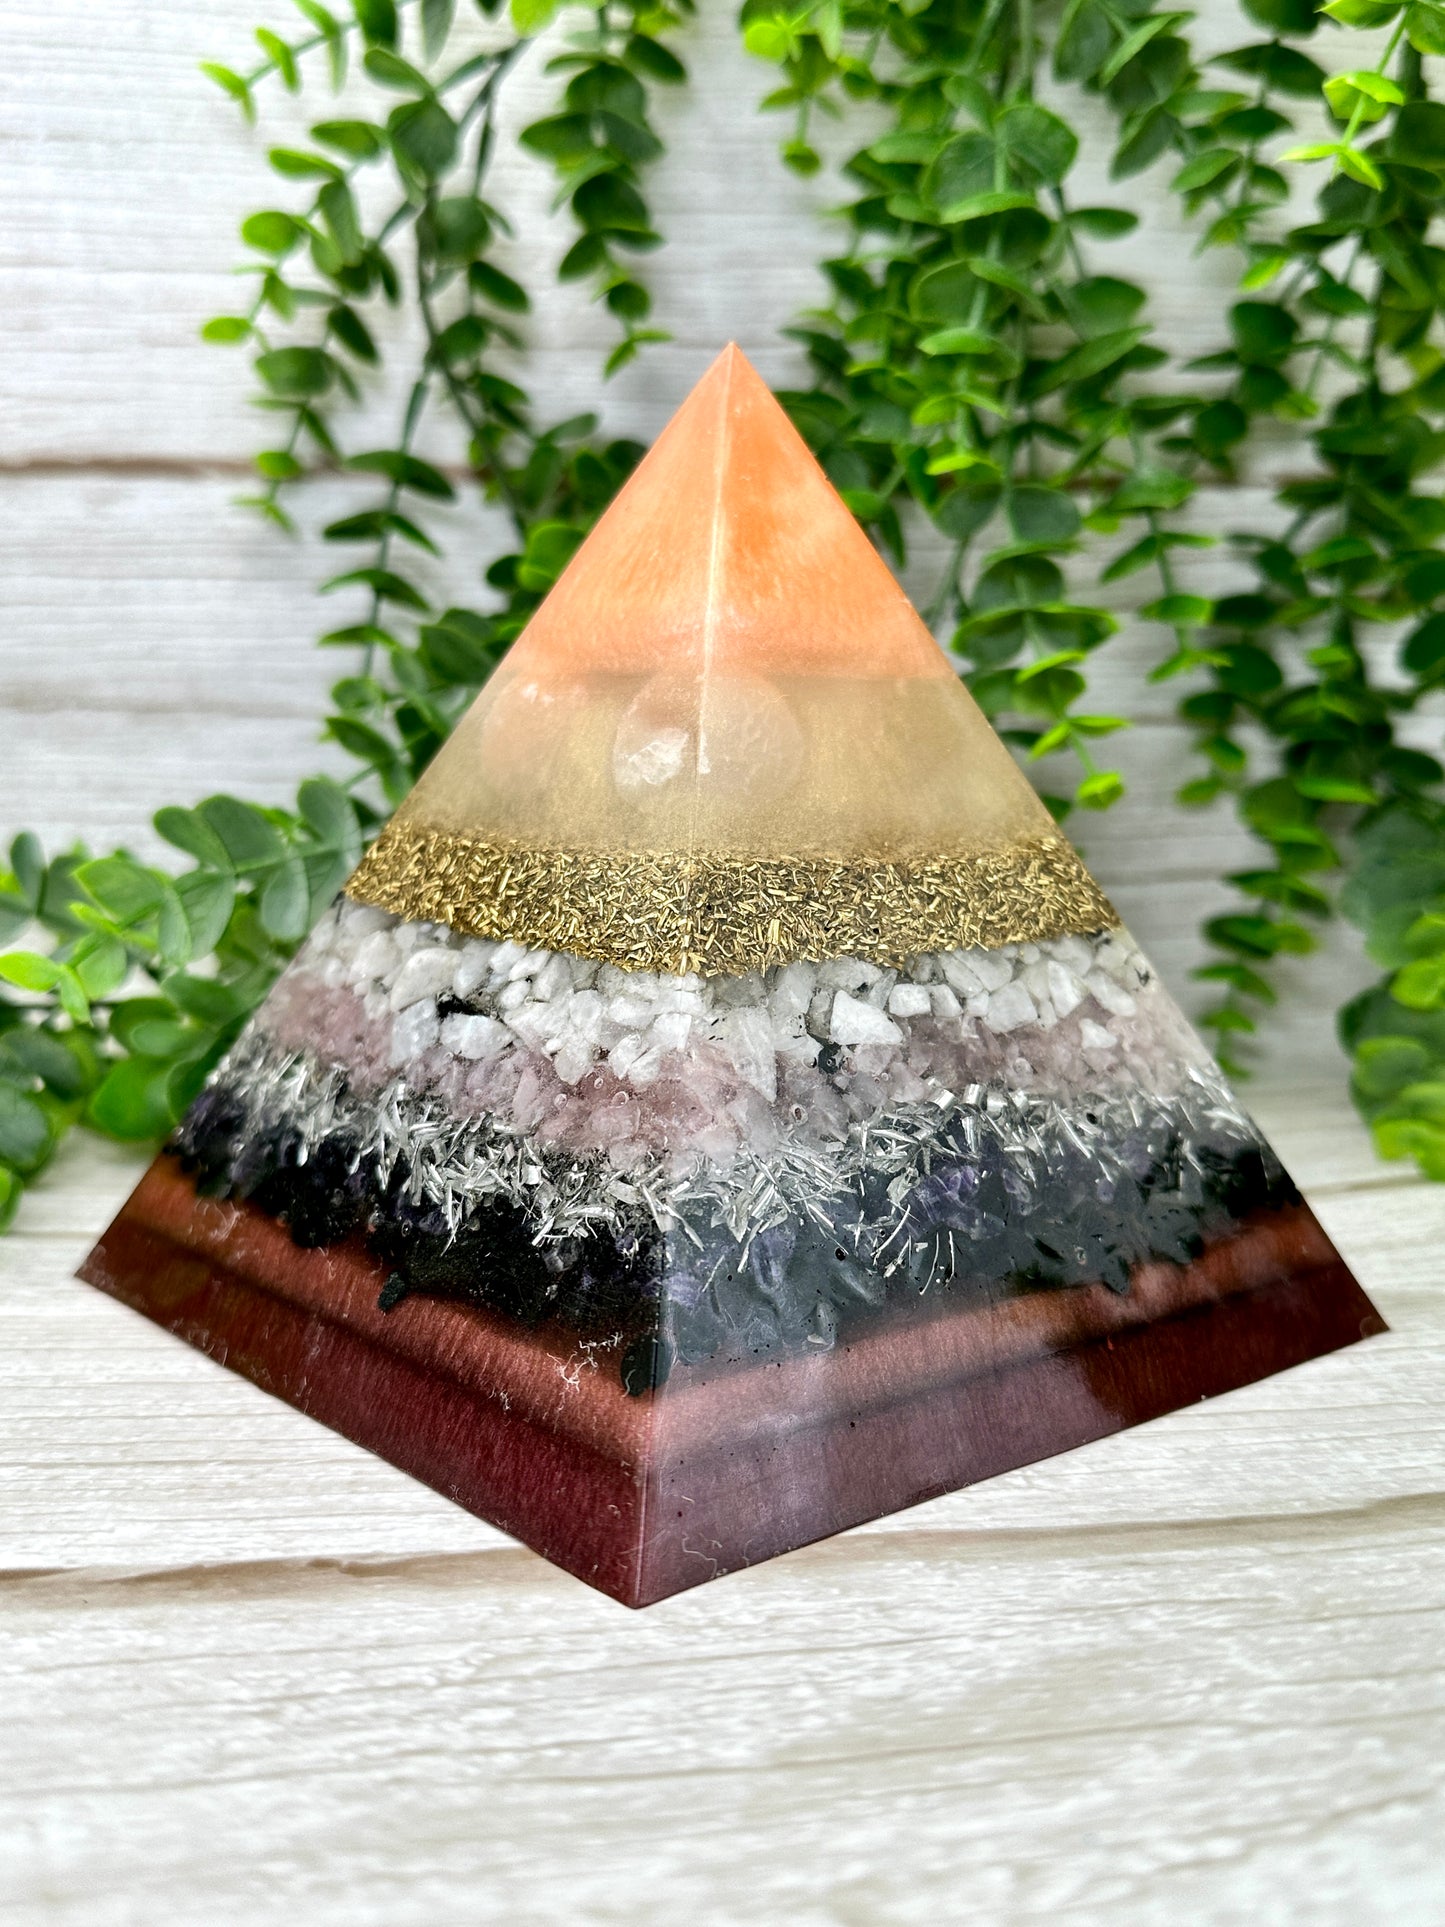 MOTHER'S DAY Special Edition Pyramid! - EMF Protector - Selenite, Moonstone, Rose Quartz, Amethyst, Black Tourmaline and Brass with Aluminum Metals